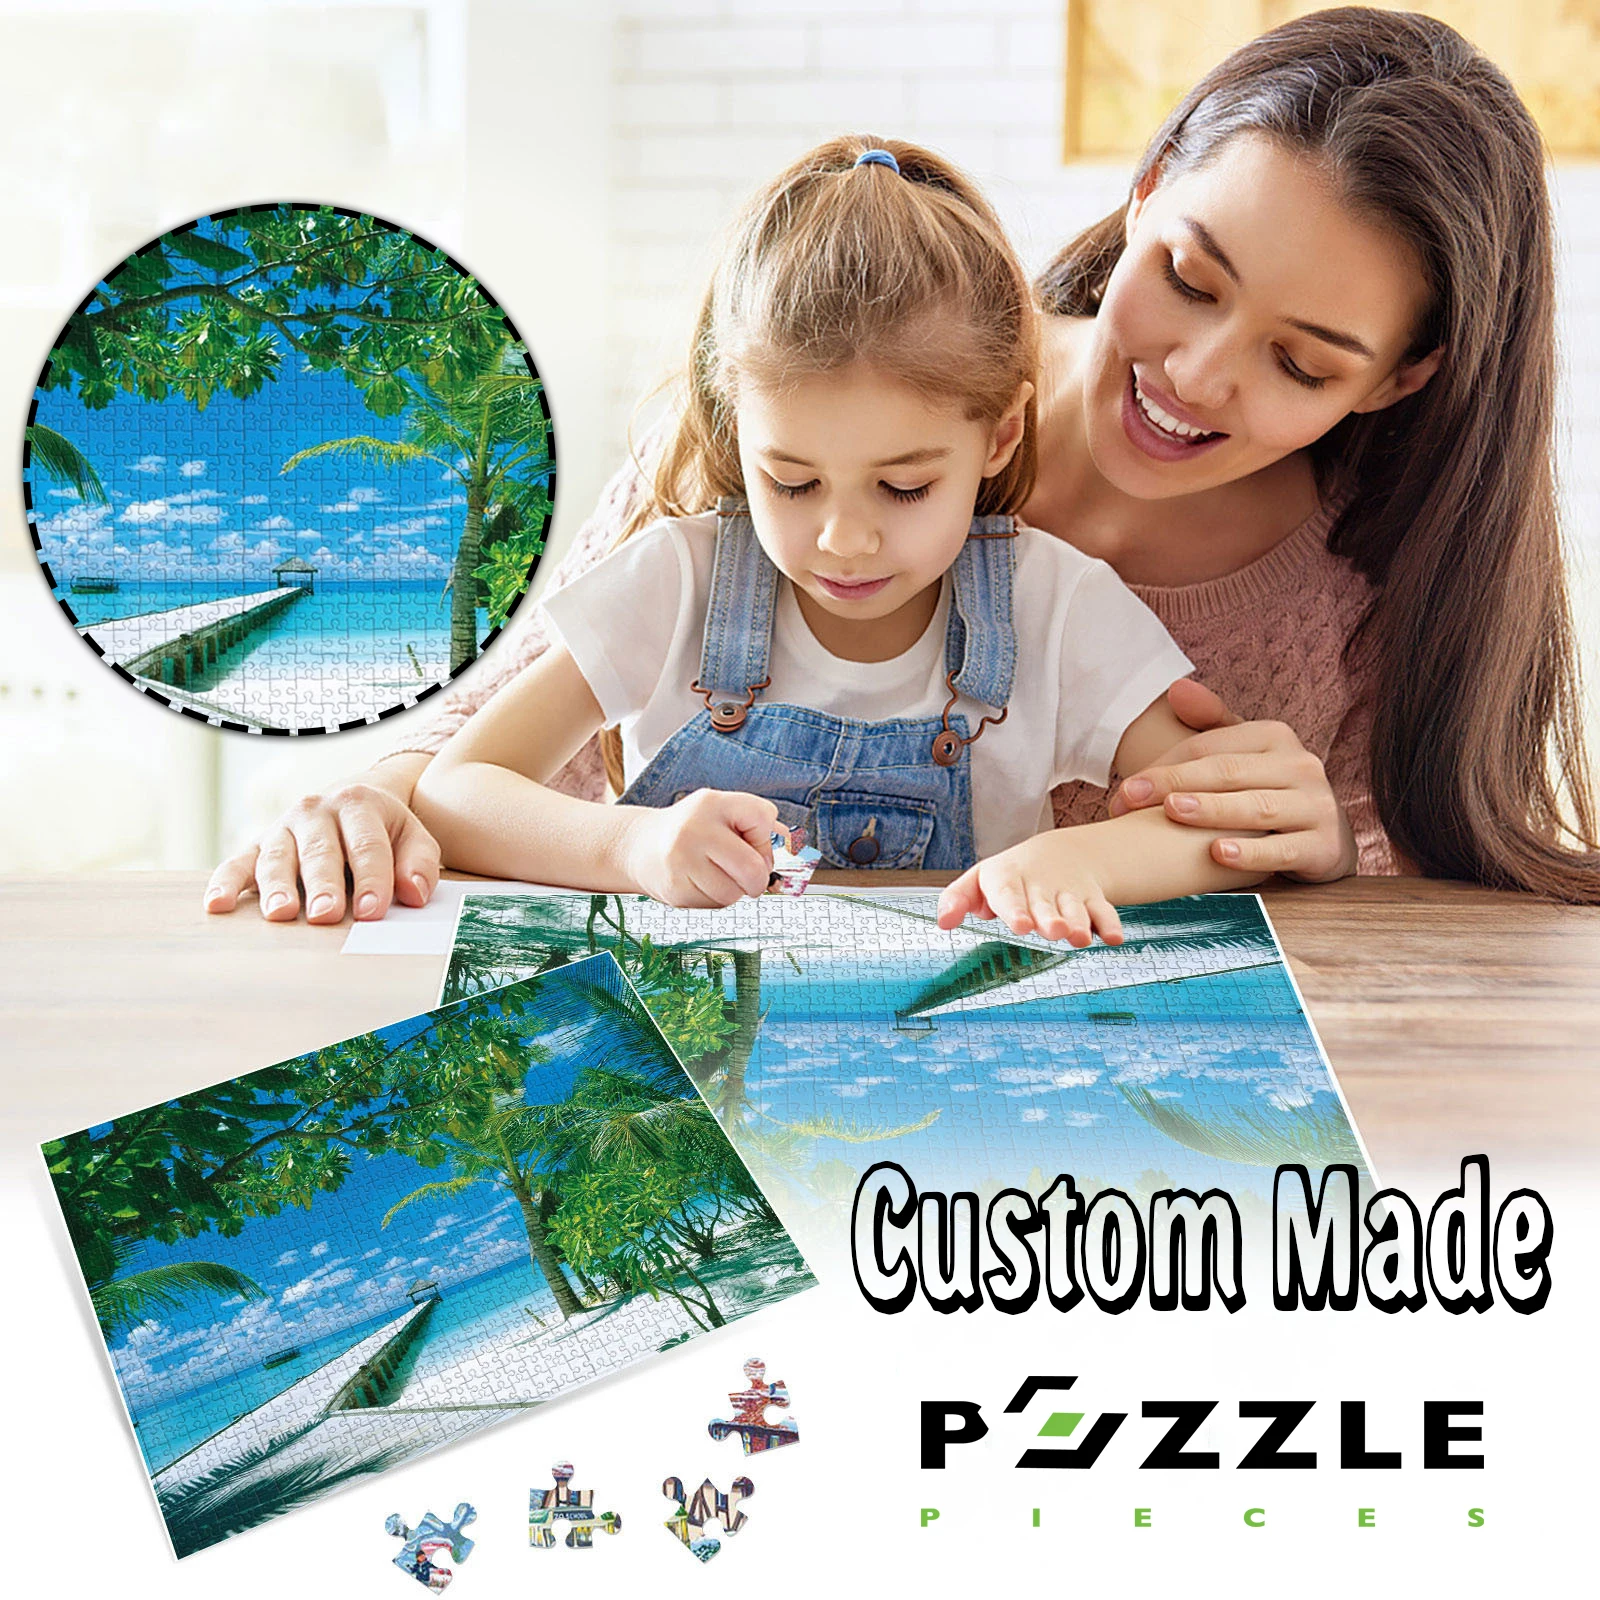 Picture Diy Photo Custom Jigsaw Puzzle Personalized Toys for Kids Decoration Collectiable Funny Adult Leisure Toys Gift with Box 6 sheets diy photo album scrapbook corner sticker pvc colorful paper corner stickers frame picture decoration